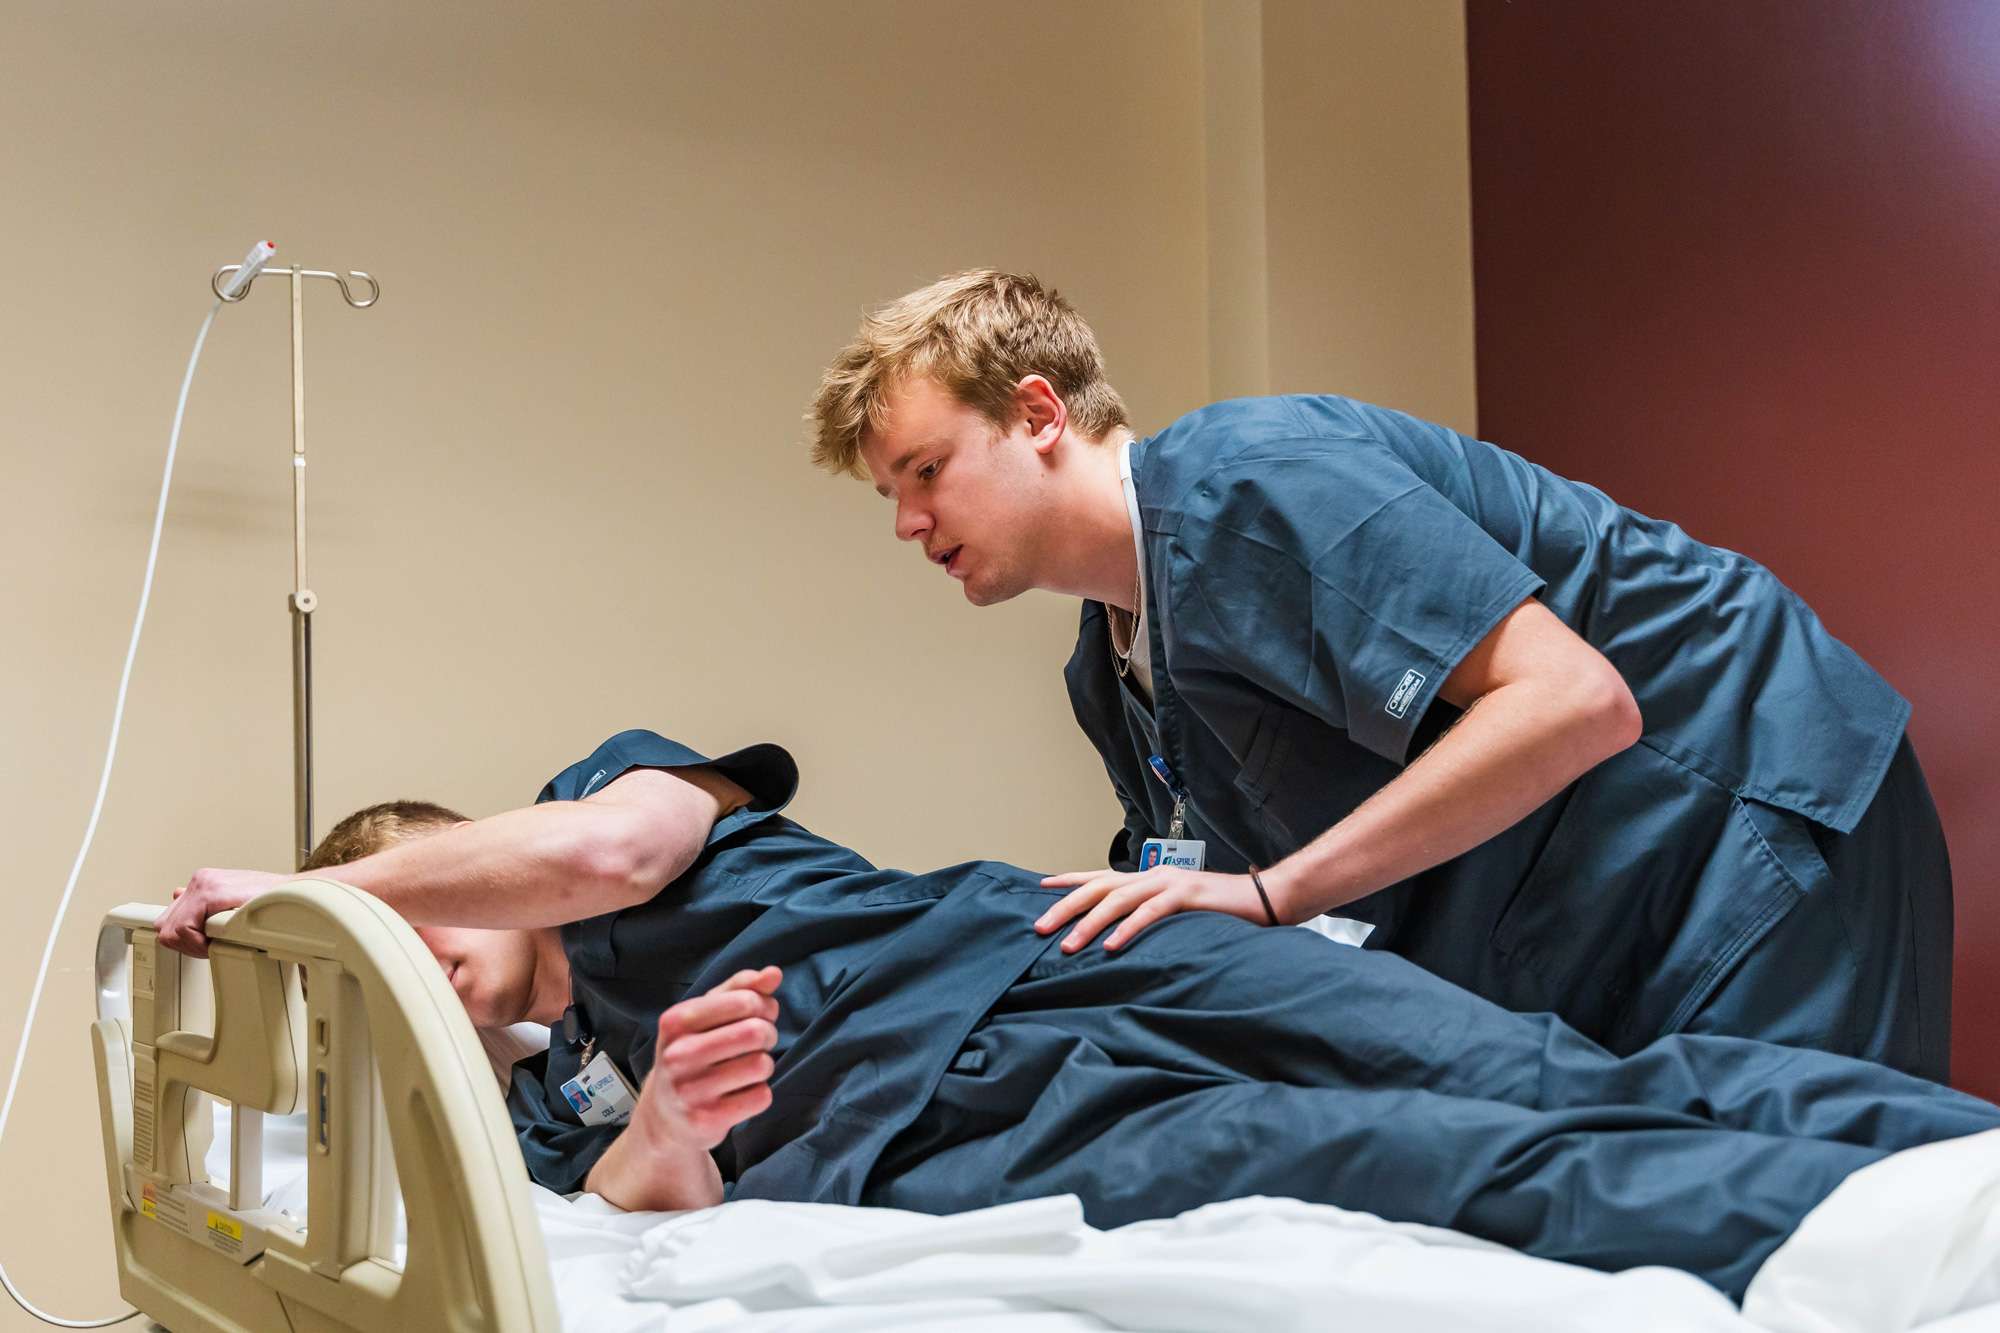 A Nursing Assistant is helping a patient move onto their side on a hospital bed.